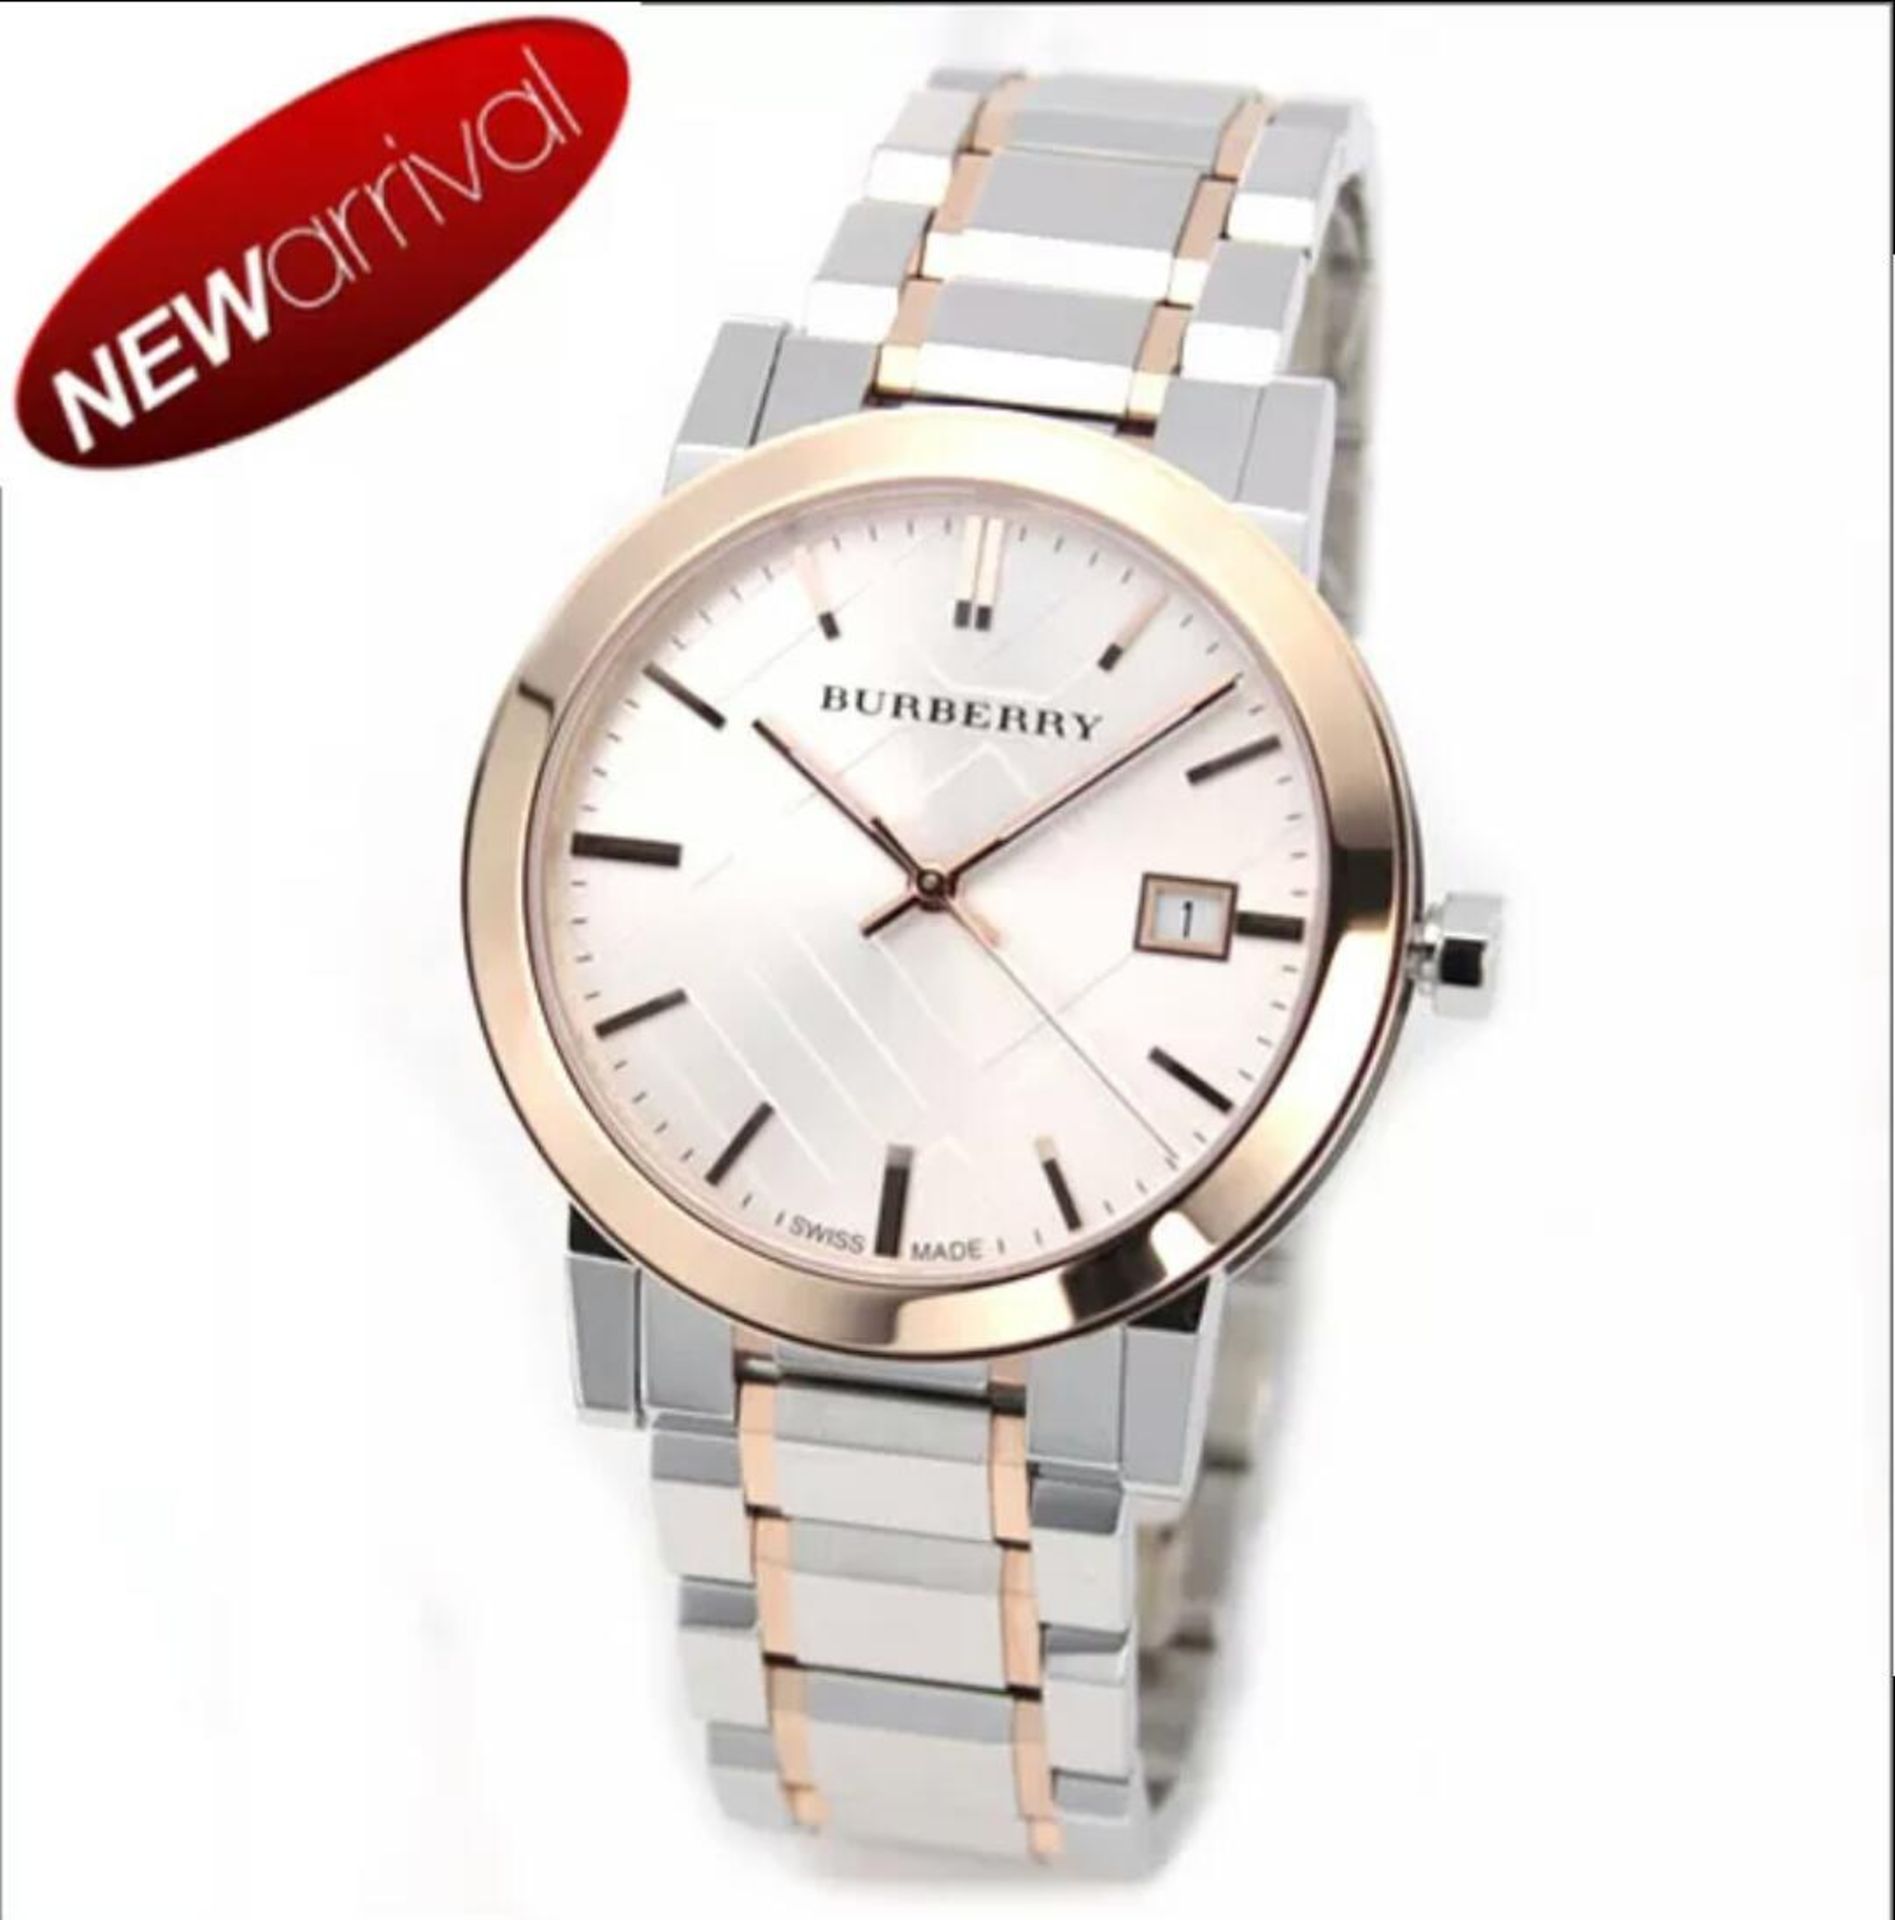 BRAND NEW BURBERRY BU9006, GENTS TWO STAINLESS STEEL DESIGNER WATCH - RRP £499, FREE P&P SERVICE